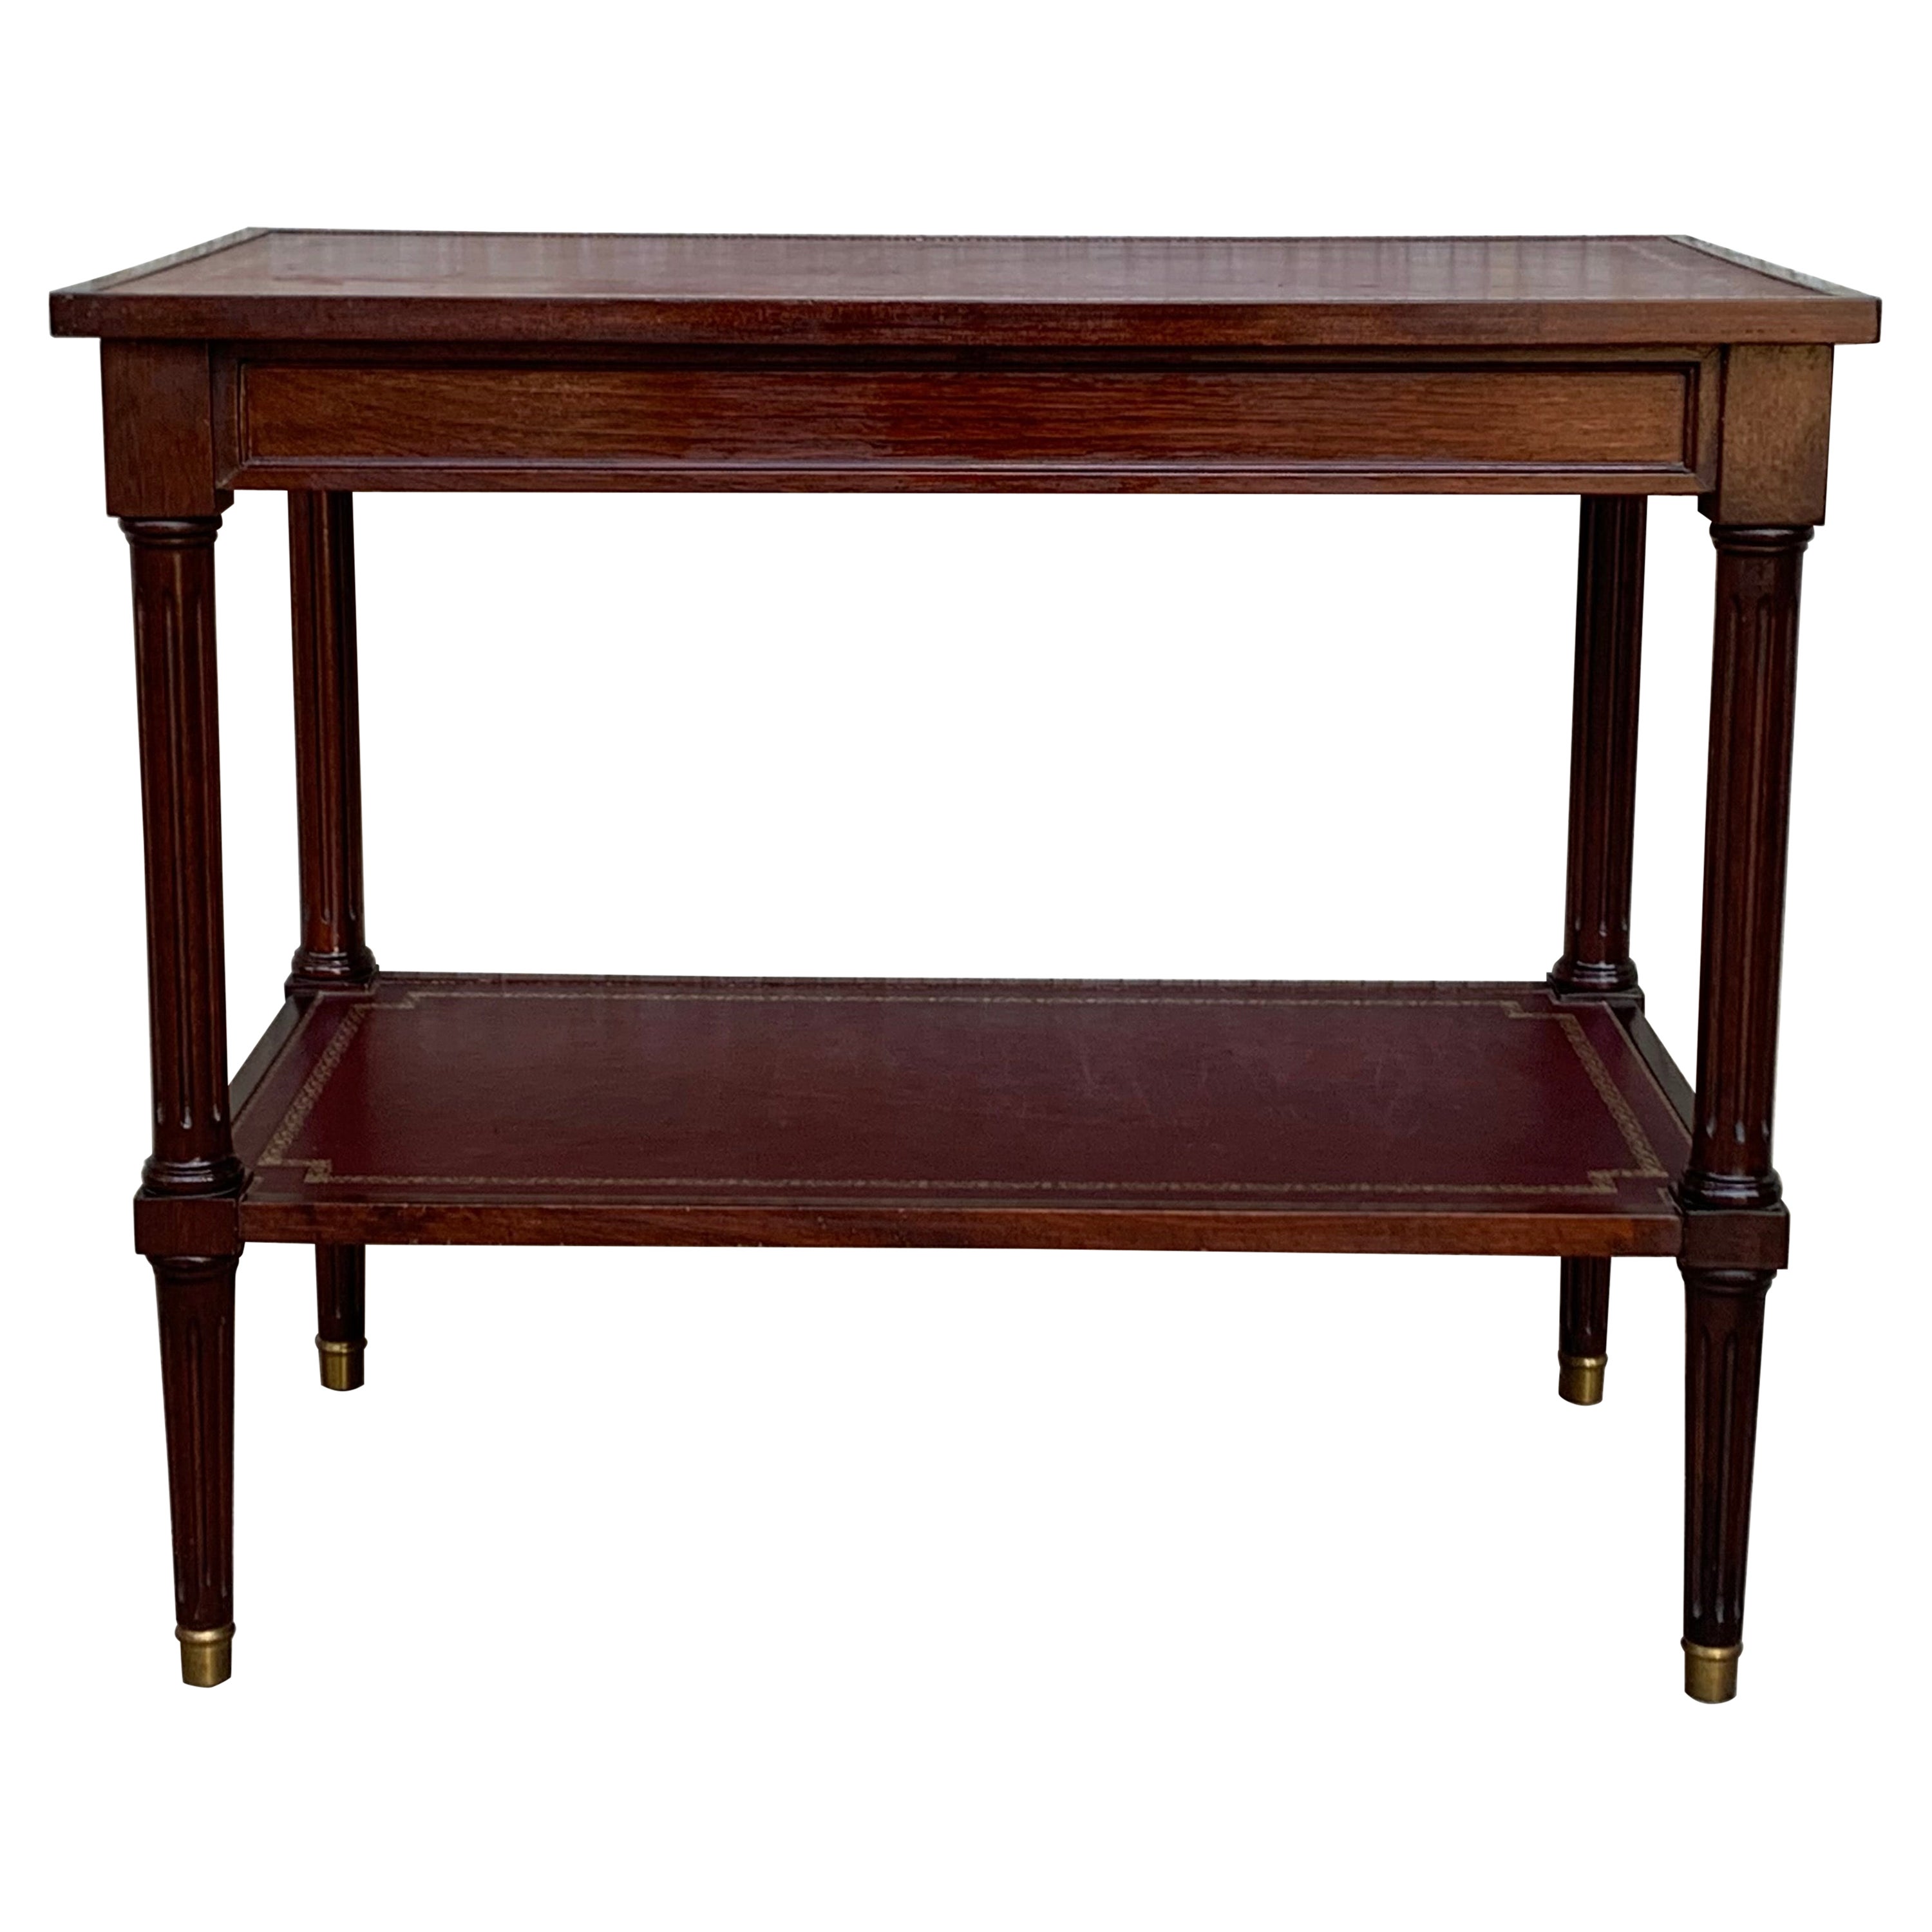 Two-Tier Red Leather Top Empire Mahogany End Table